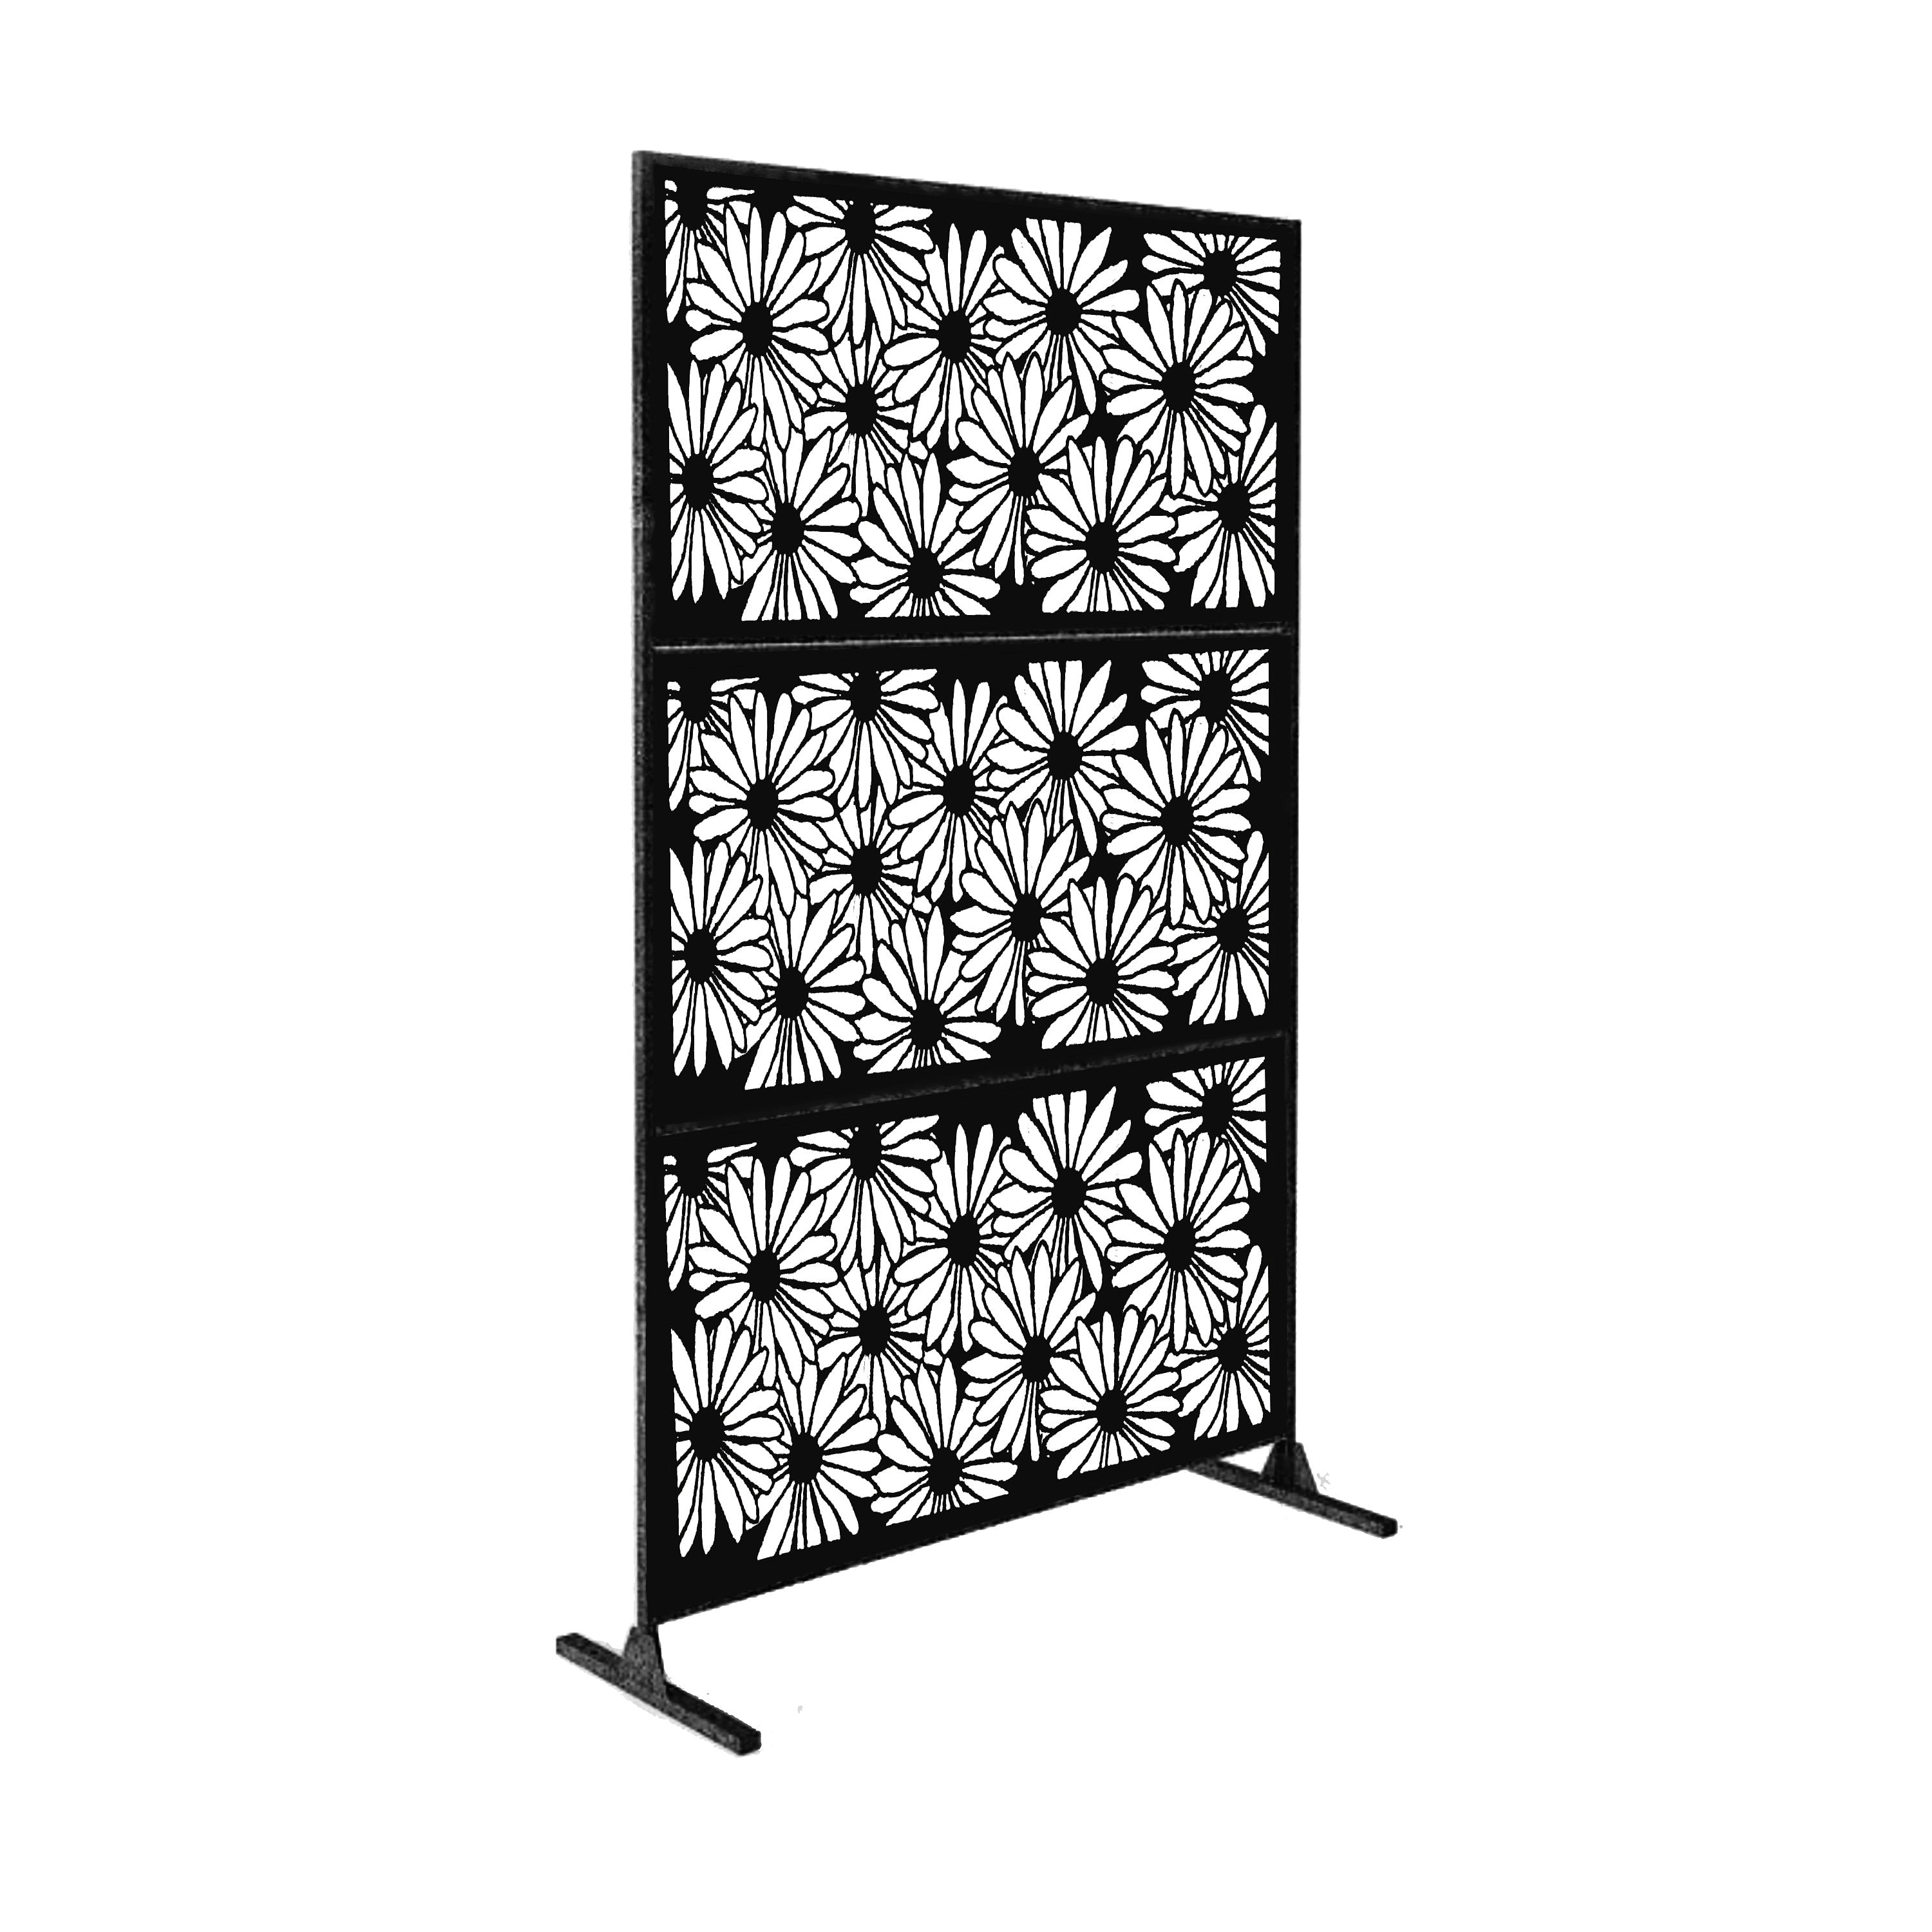 Metal Privacy Screen, Laser Cut Decorative Steel Privacy Panel Metal Fencing, Hanging Room Divider Partitions Panel Screen,48x75inch